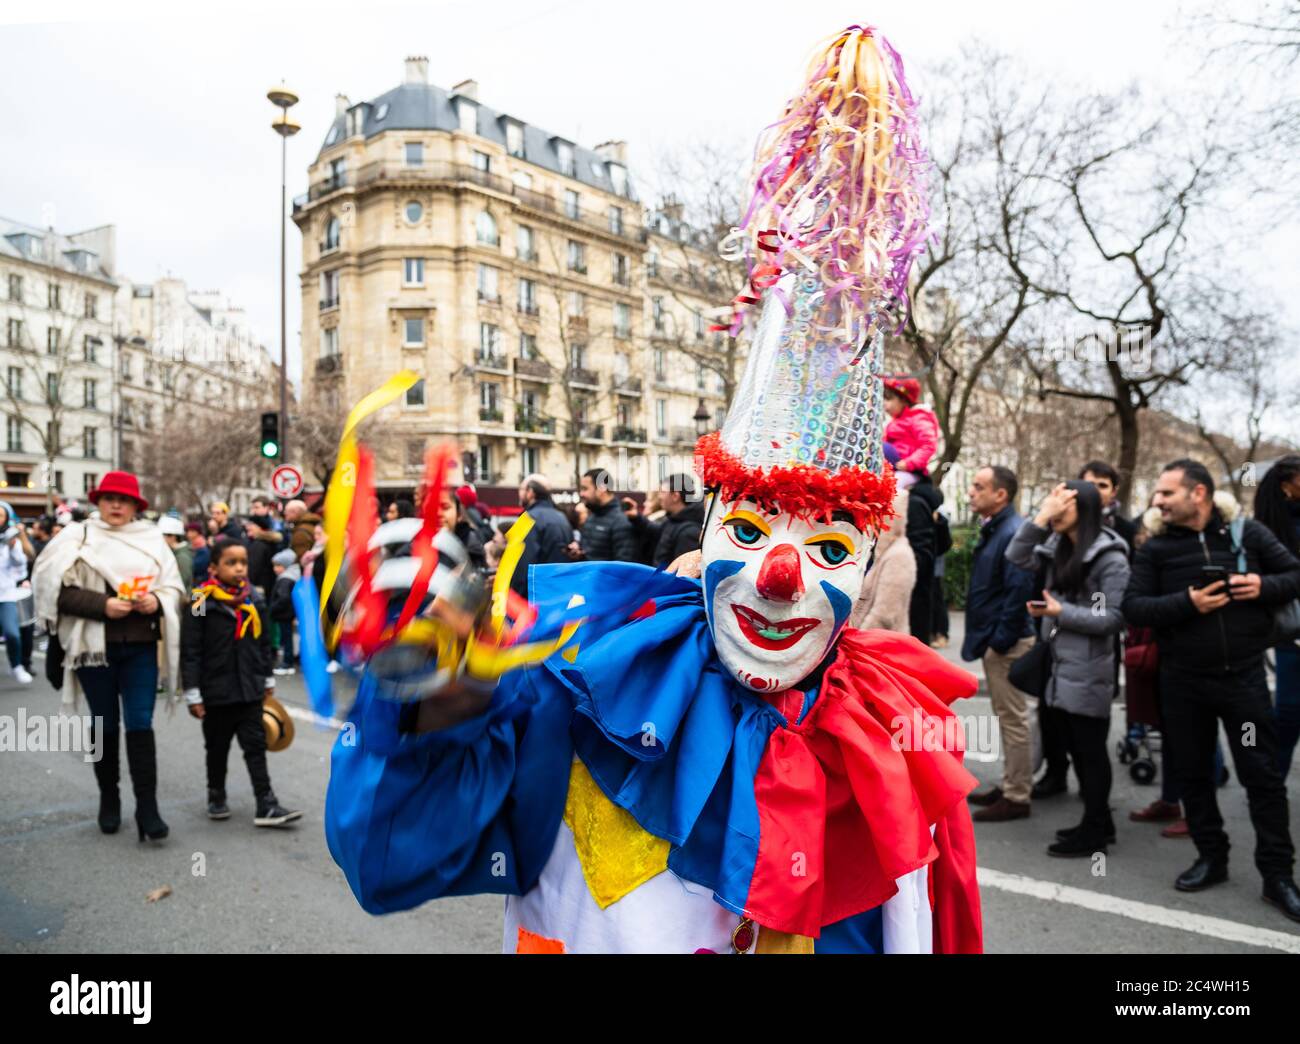 PARIS, FRANCE - FEBRUARY 23, 2020: Man in clown costume at traditional  Carnival in Paris. Colorful Carnaval de Paris is annual event Stock Photo -  Alamy